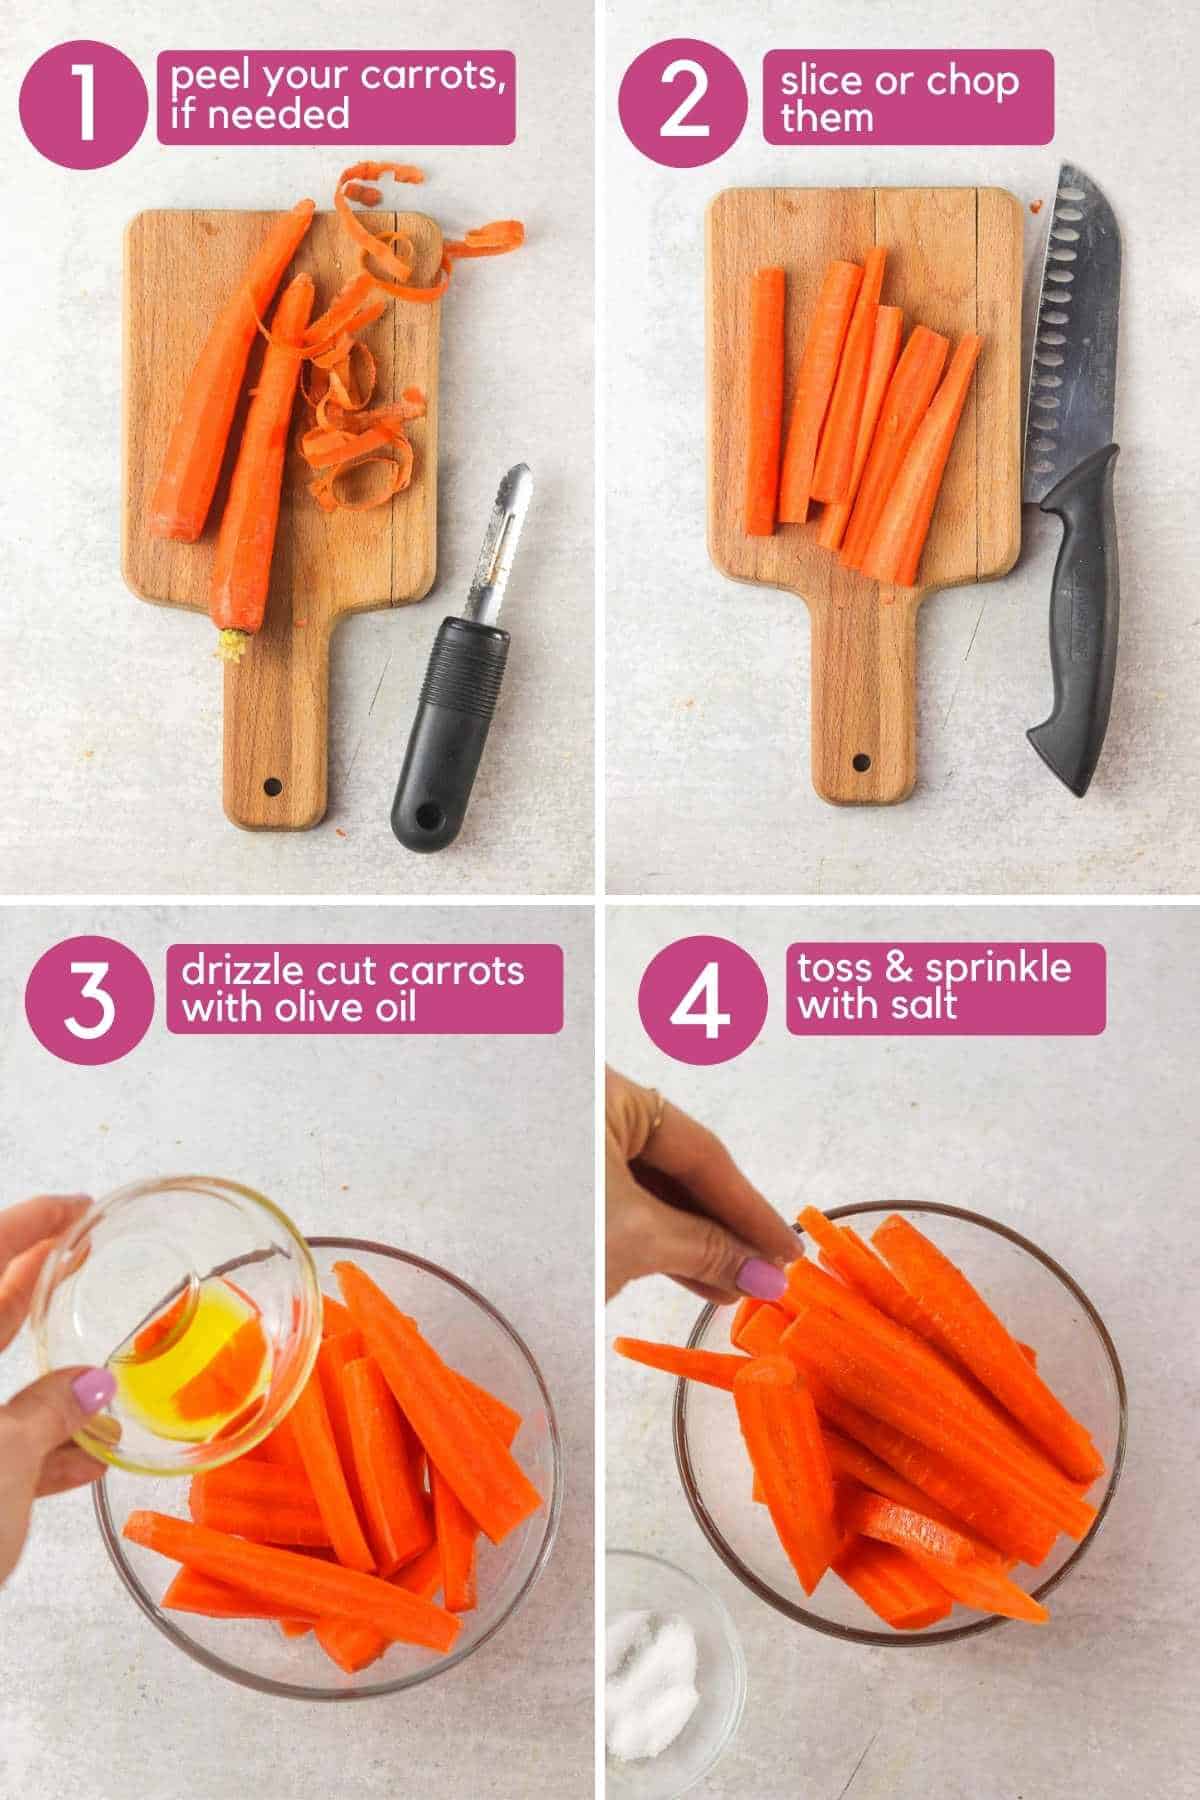 How to prepare carrots to cook in the air fryer.